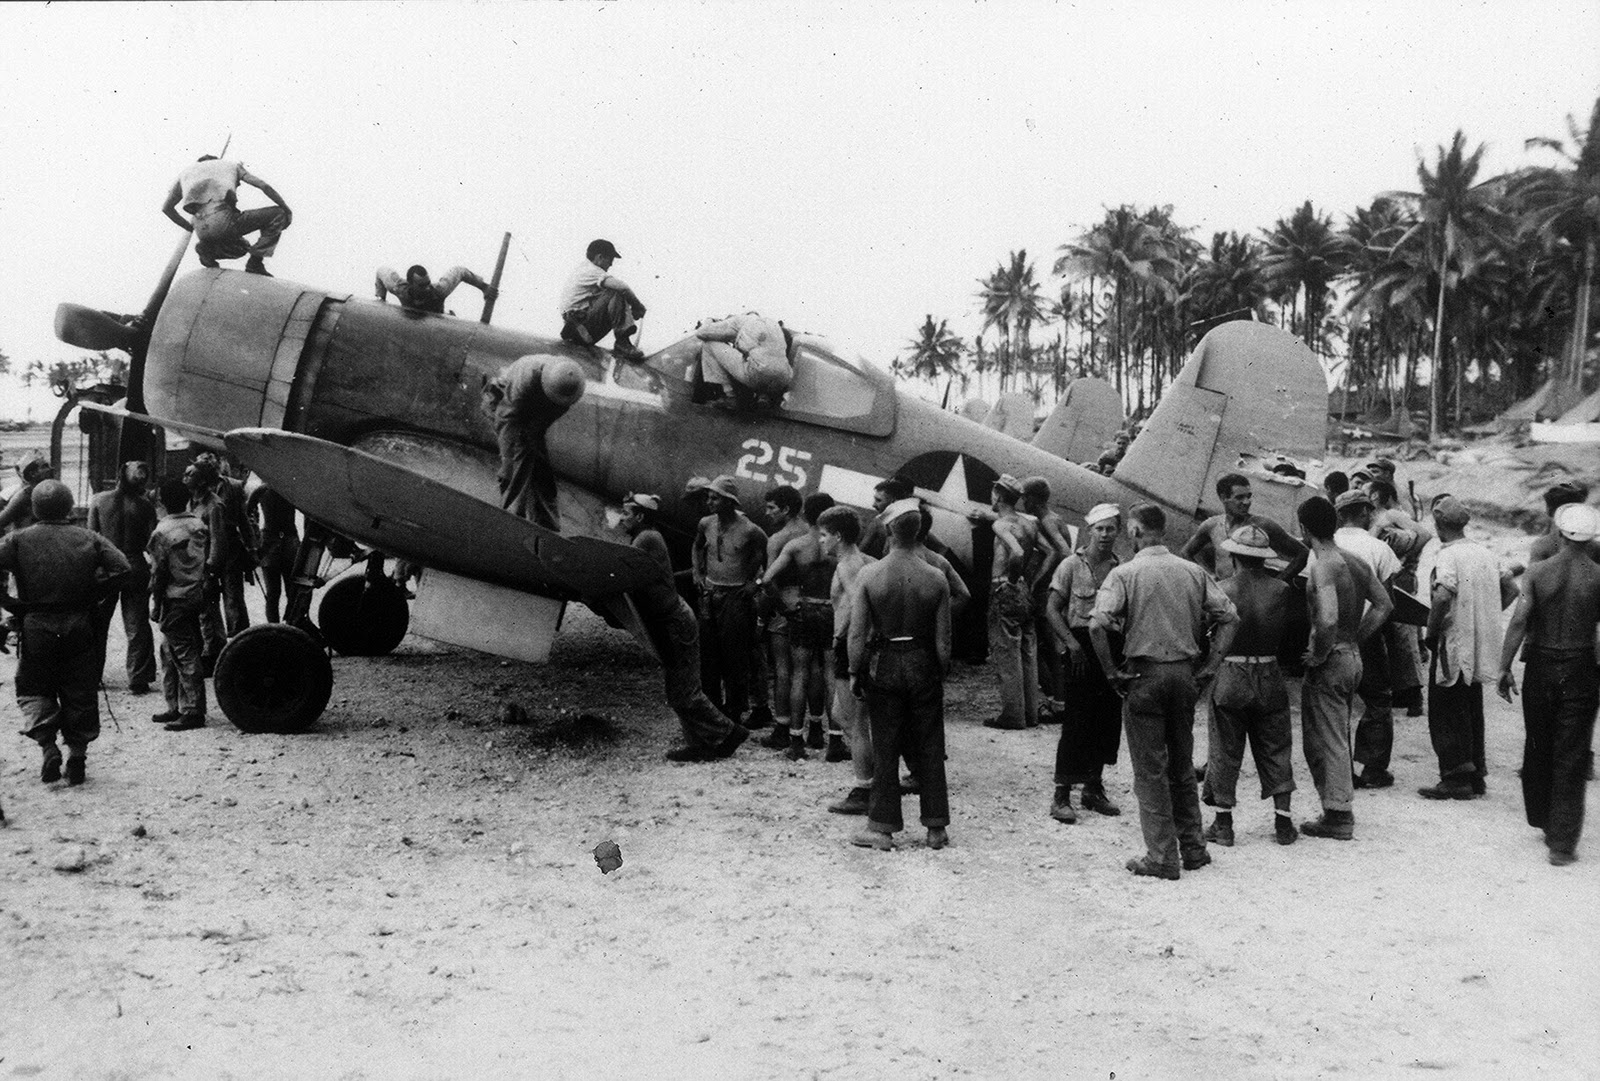 A badly damaged F4U-1A Corsair of Marine Squadron 216 flown by a wounded Lt Robert Marshall managed to return safely to Torokina, Bougainville, Solomons after an encounter with a swarm of A6M Zeros over Rabaul, New Britain, Dec 19 1943. Photo 1 of 5.